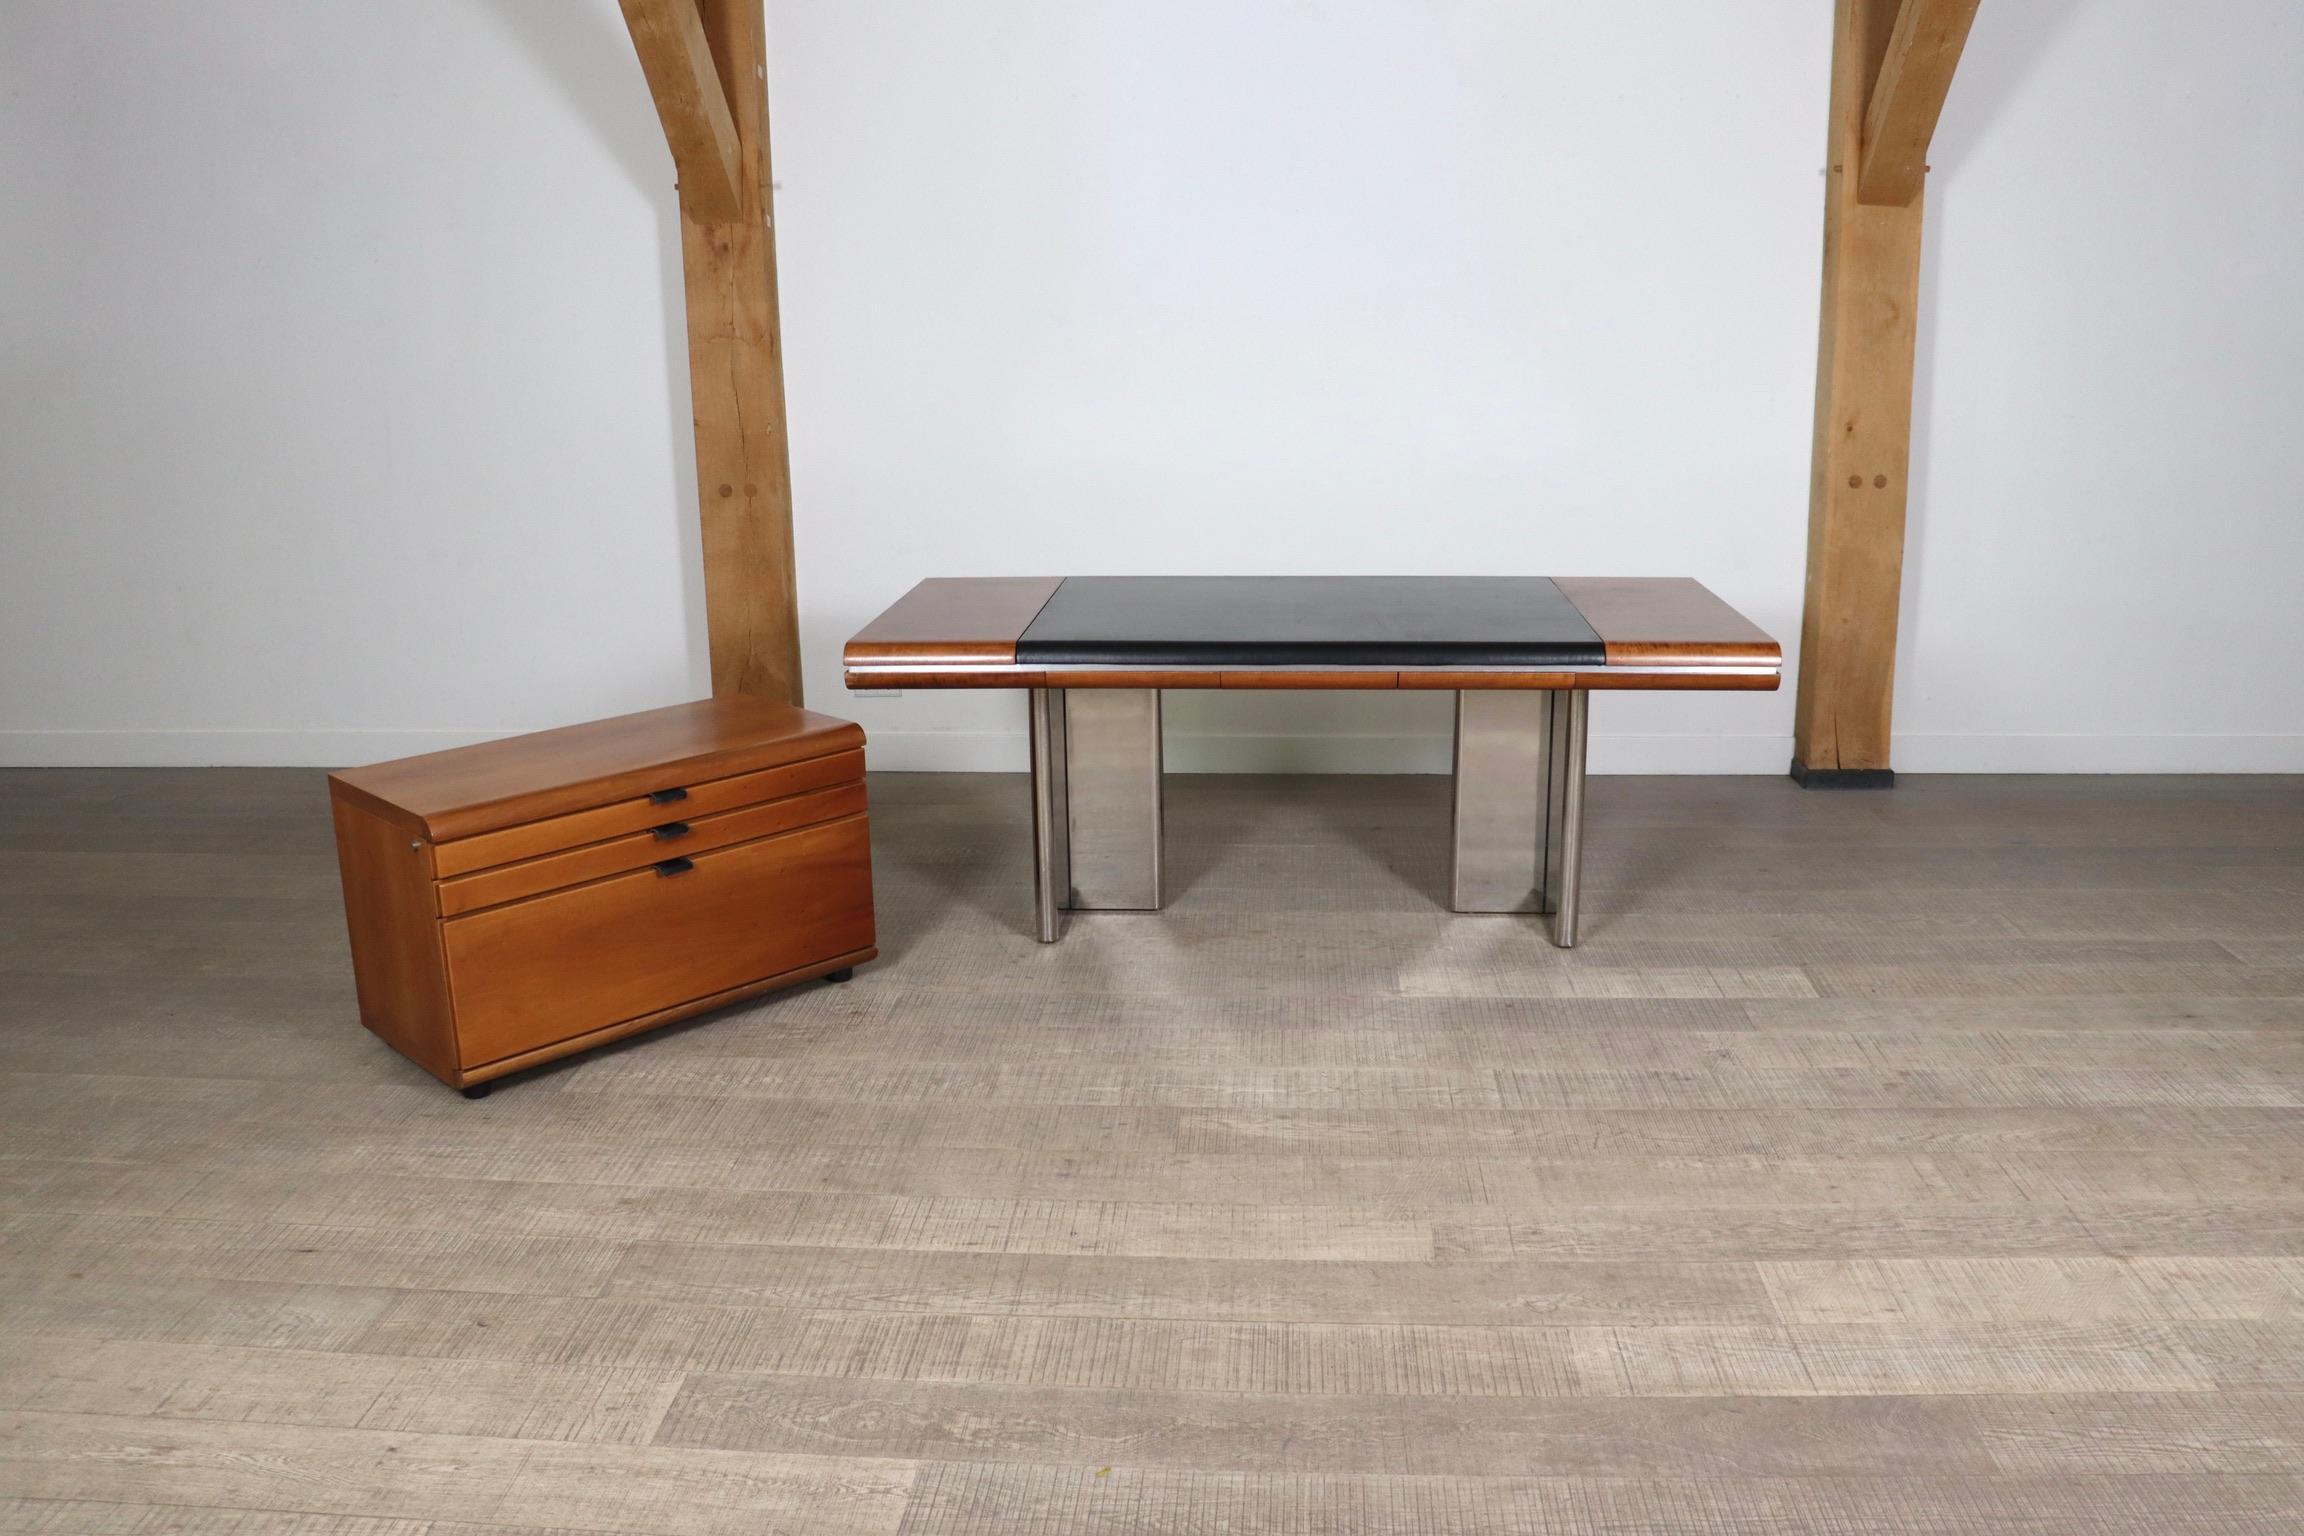 Impressive executive desk and matching credenza designed by Hans von Klier in the 1970s. A striking combination of differently textured materials in three colors makes this desk an intriguing piece. The two t-shaped legs in chromed metal add a